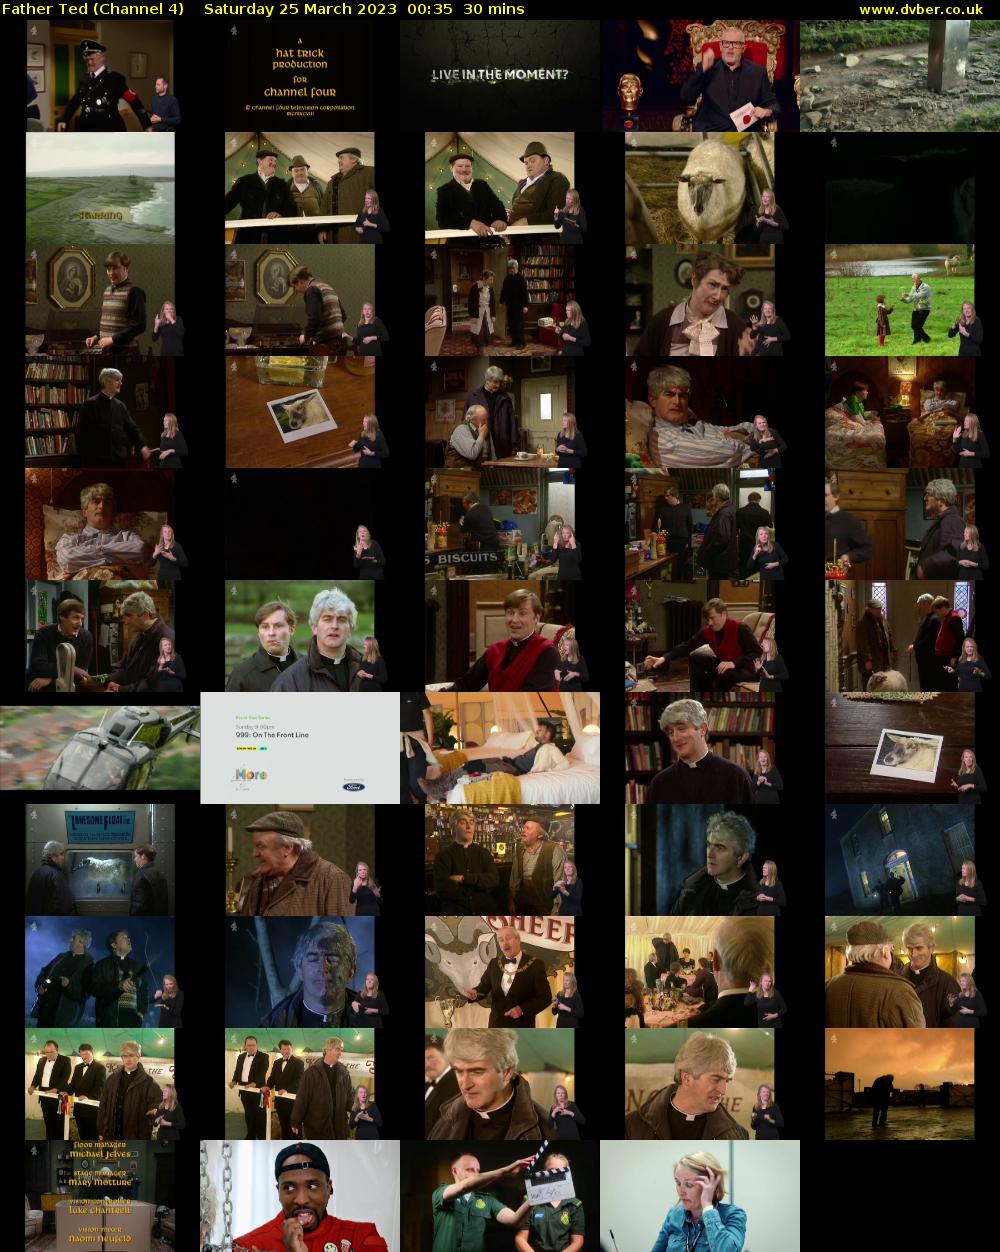 Father Ted (Channel 4) Saturday 25 March 2023 00:35 - 01:05